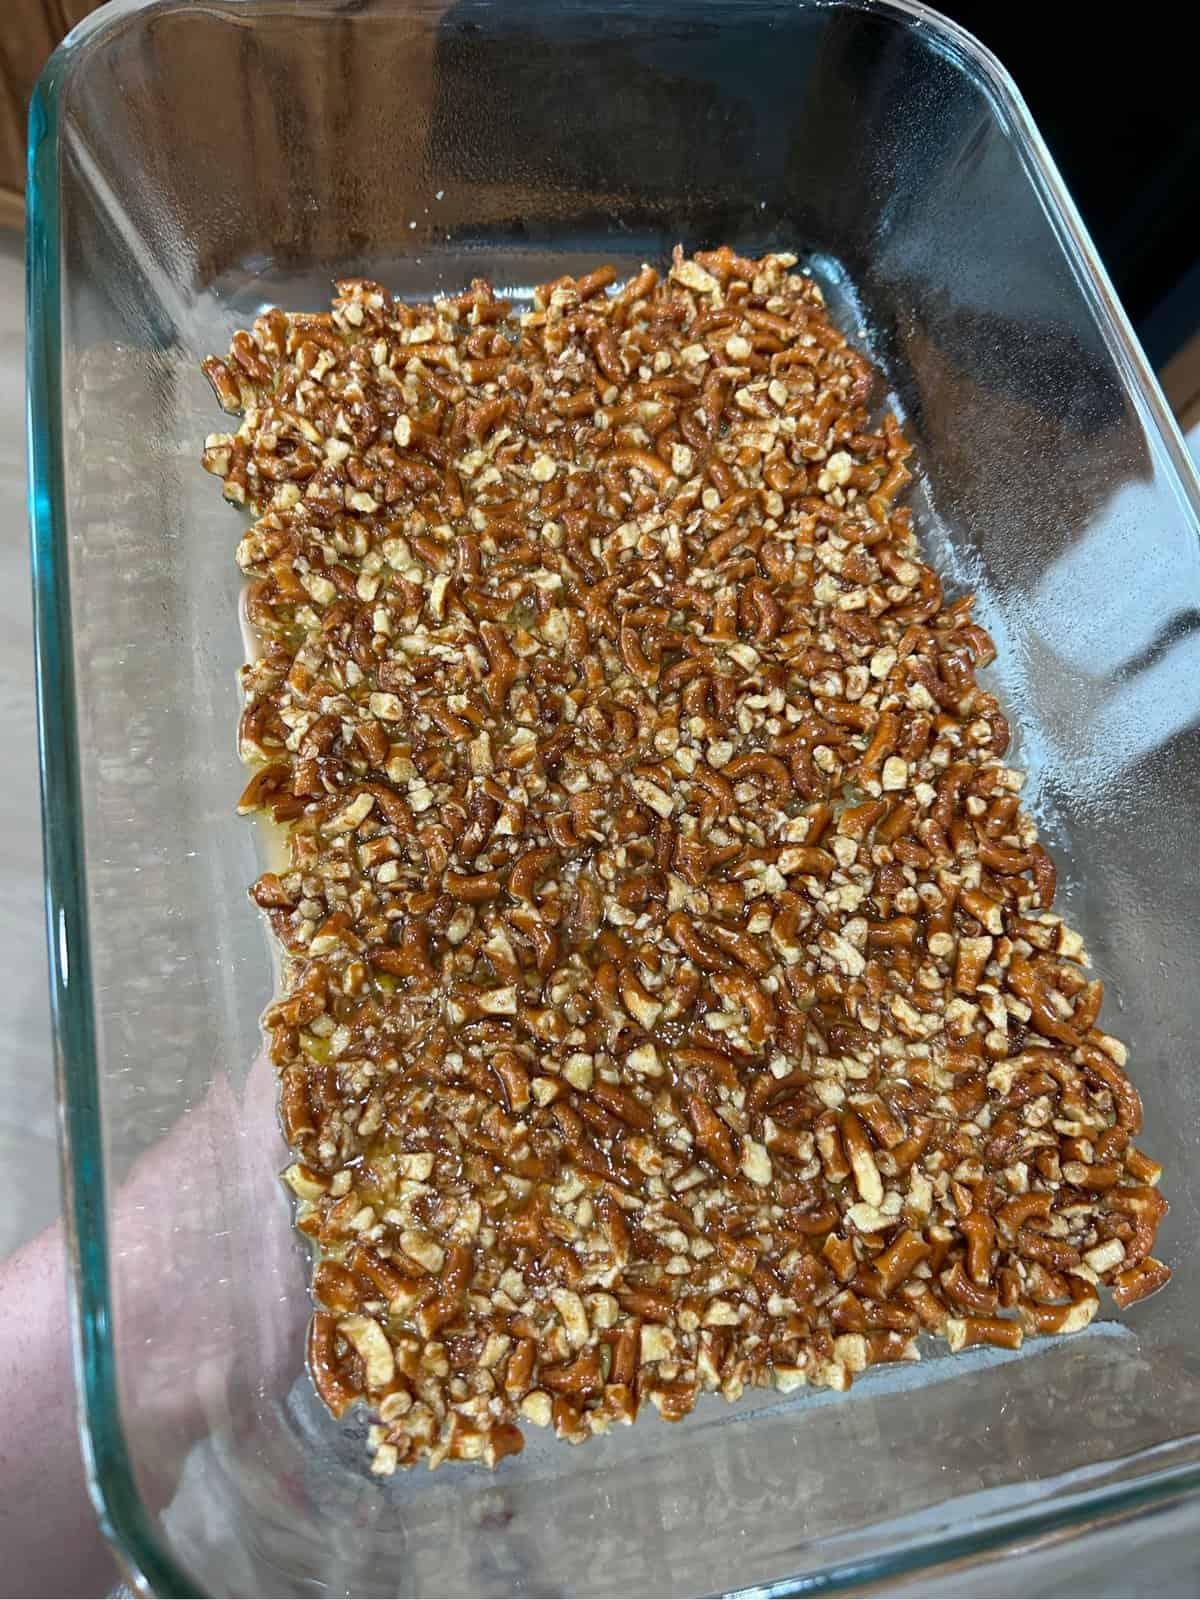 Crushed pretzels in glass cake pan